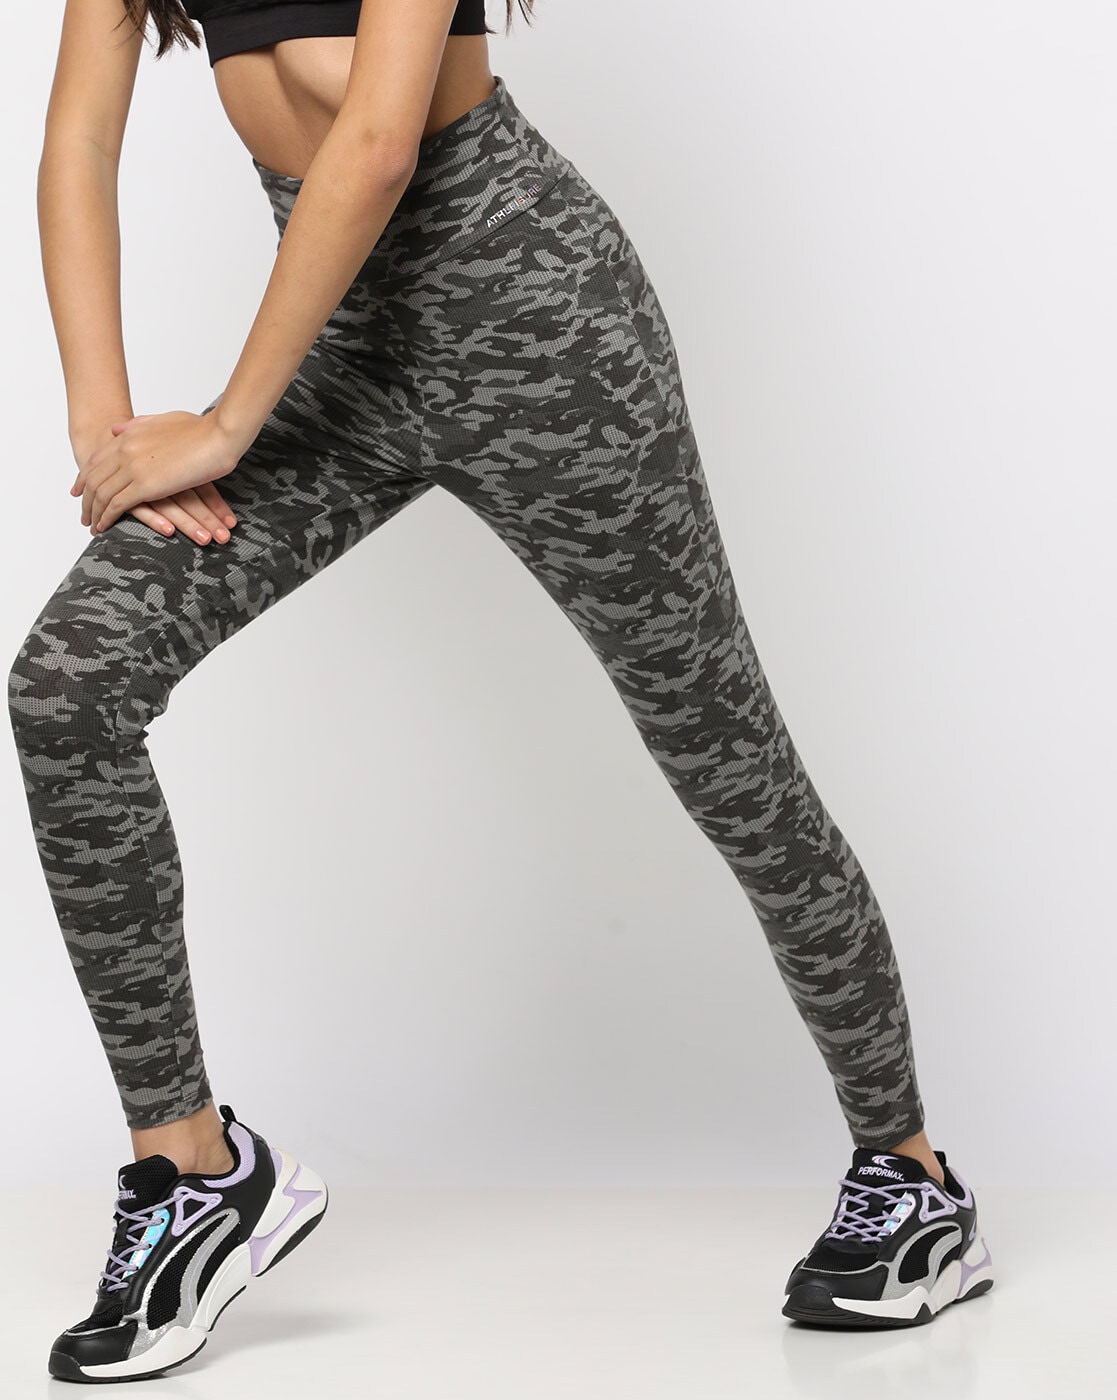 Buy U.S. CROWN Army Print Leggings/joggers for Women Camouflage Print Yoga  pant at Amazon.in